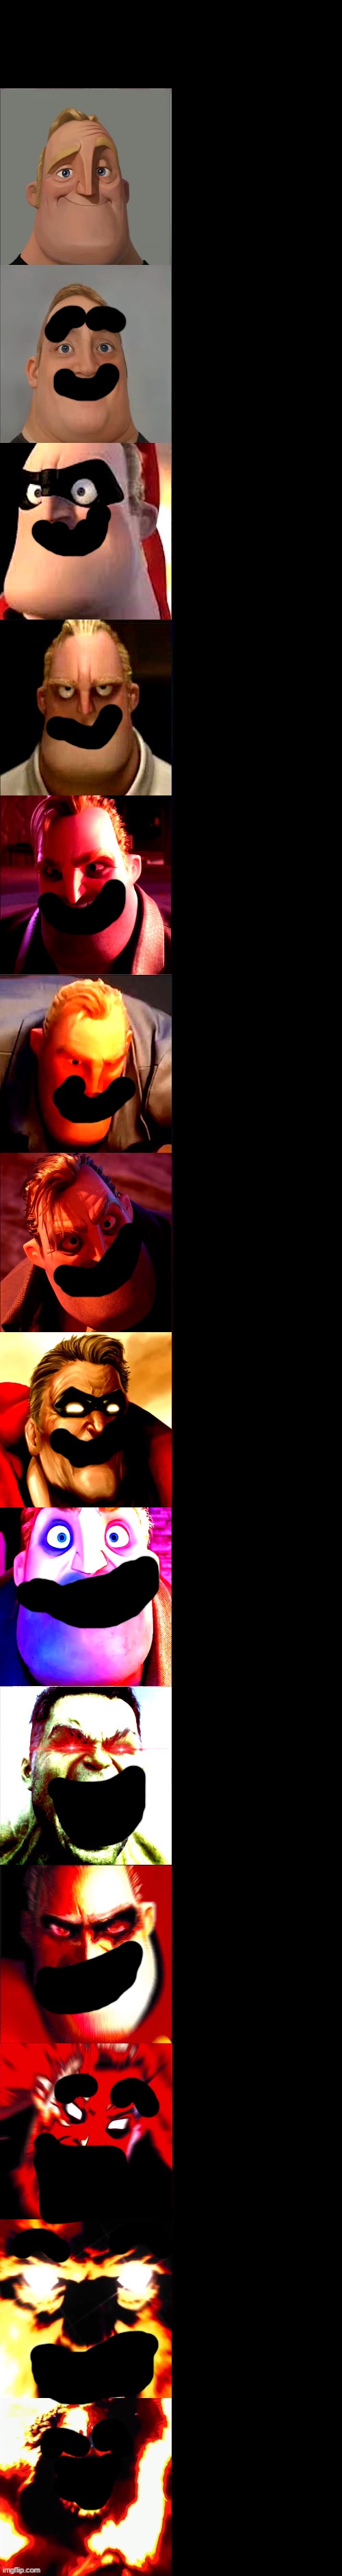 mr incredible becoming angry but he stays happy | image tagged in mr incredible becoming angry extended | made w/ Imgflip meme maker